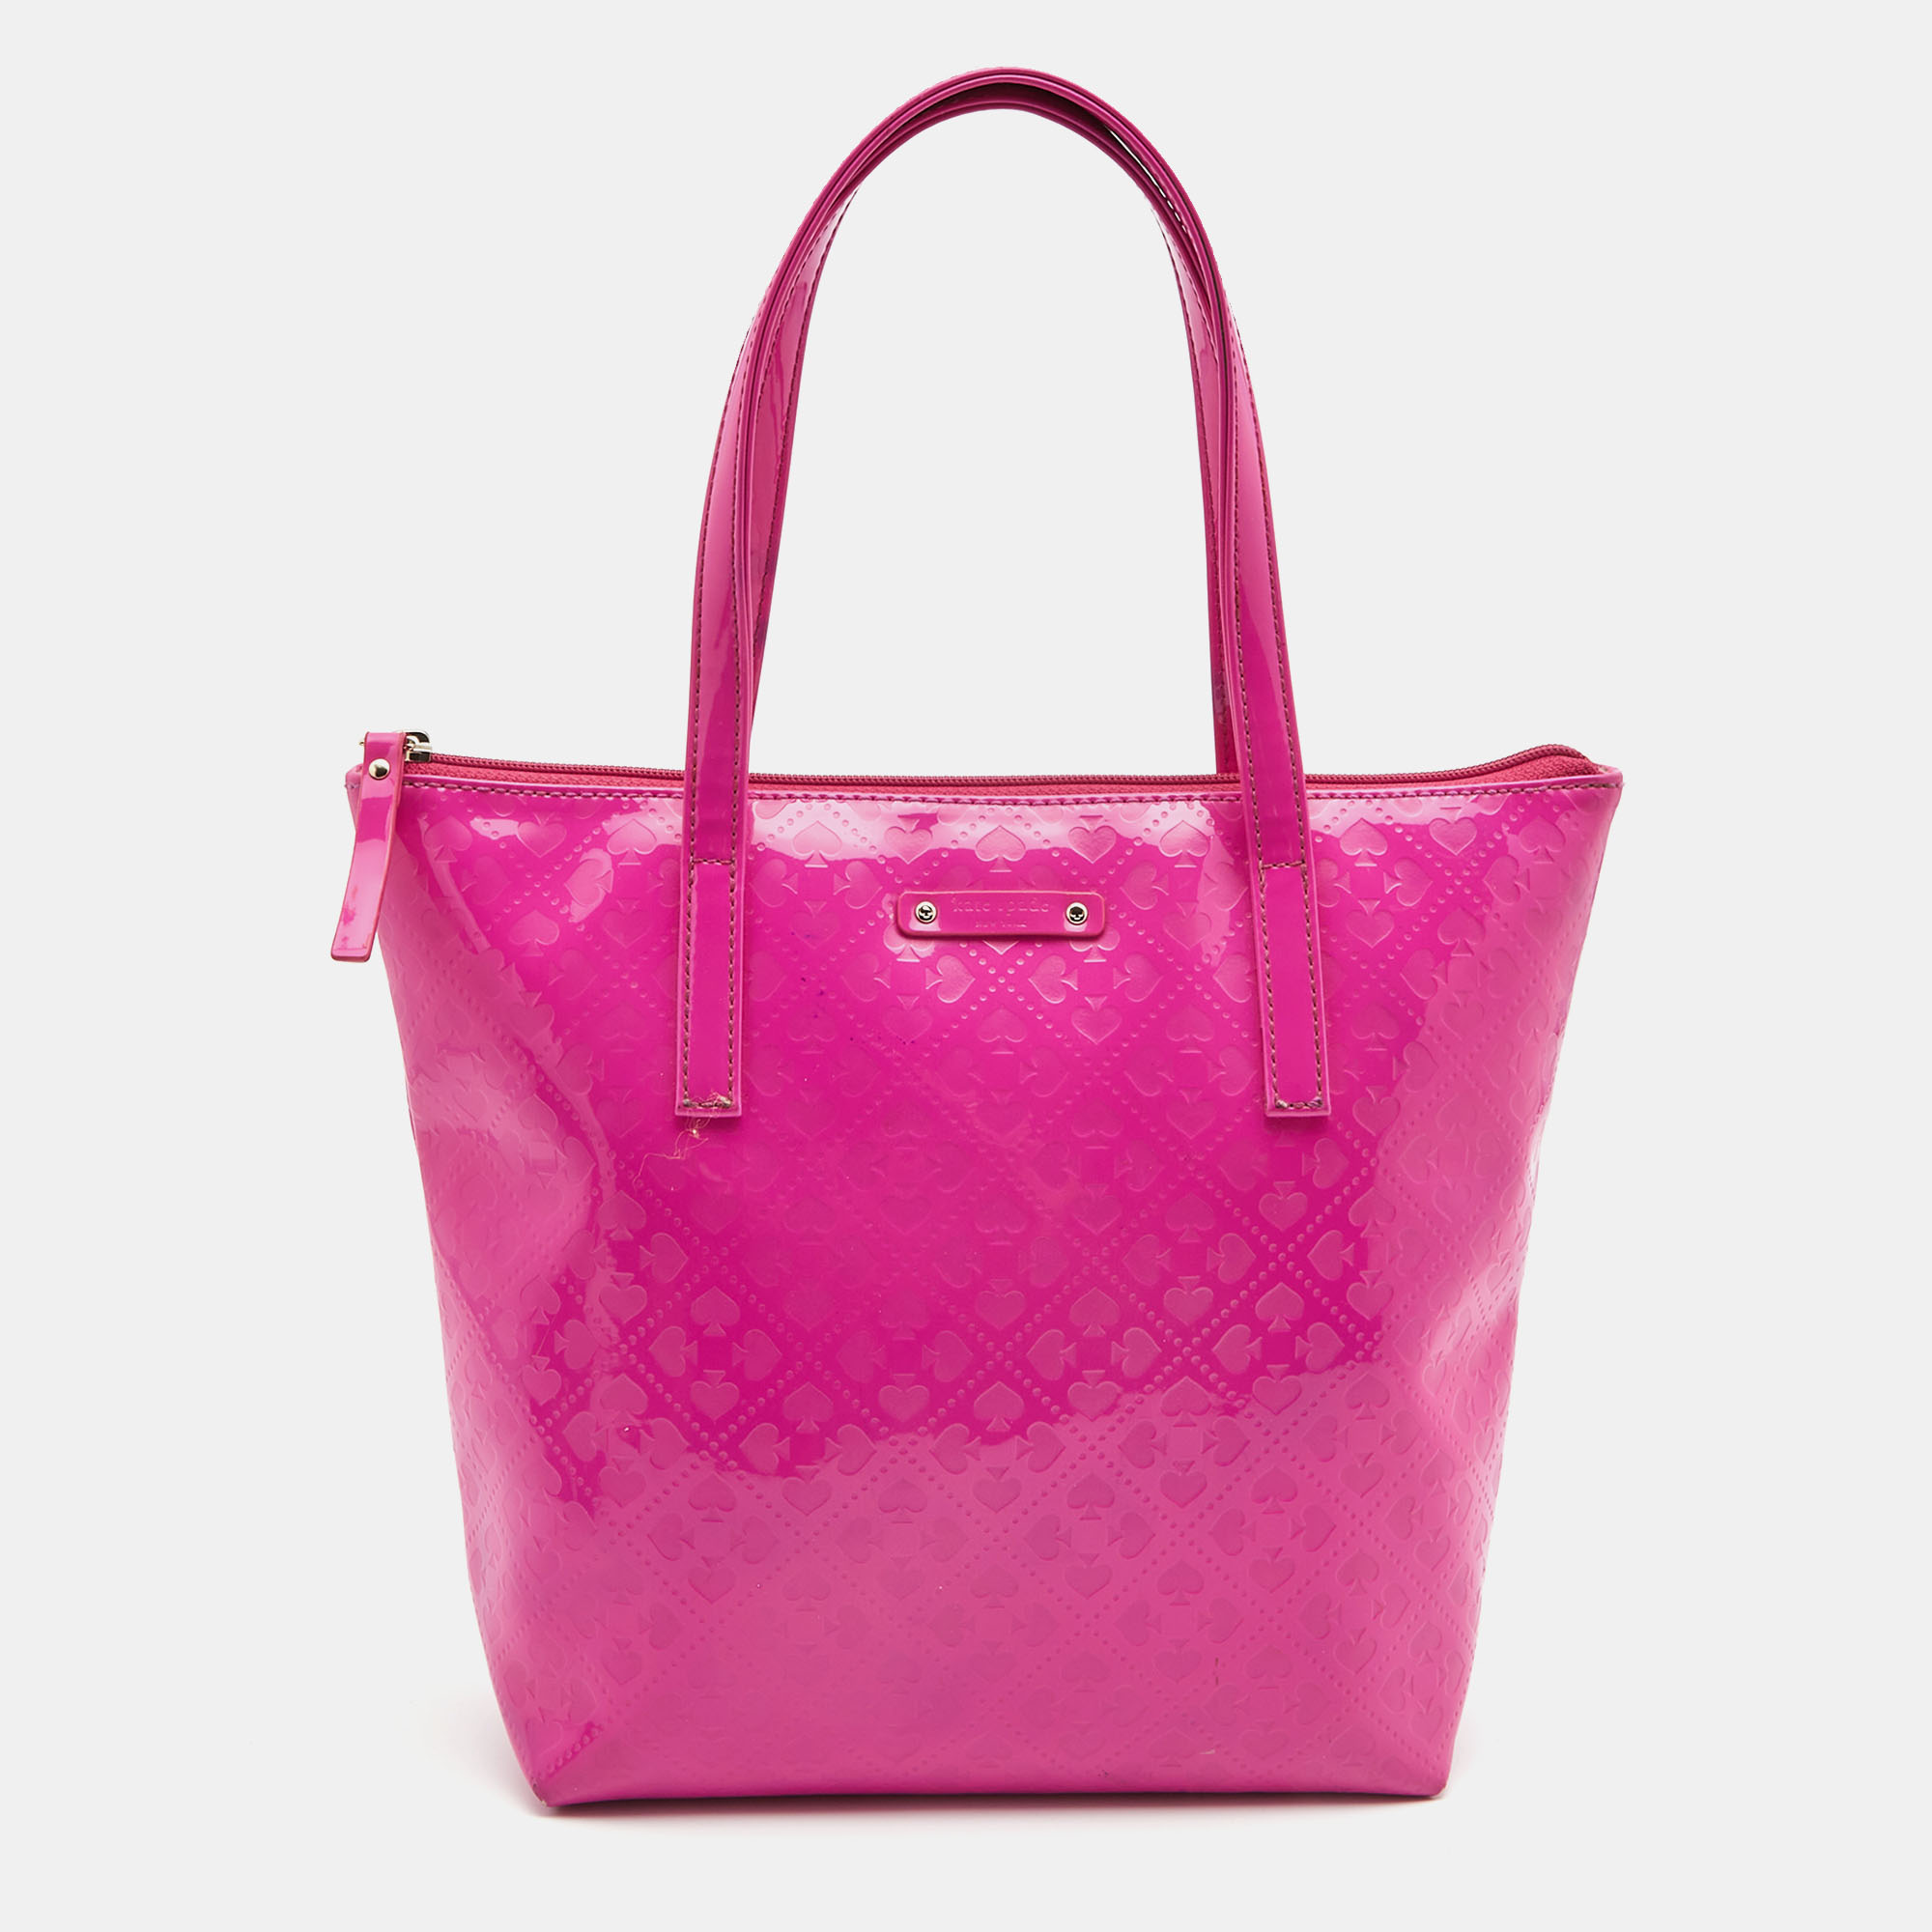 Pre-owned Kate Spade Pink Embossed Patent Leather Tote